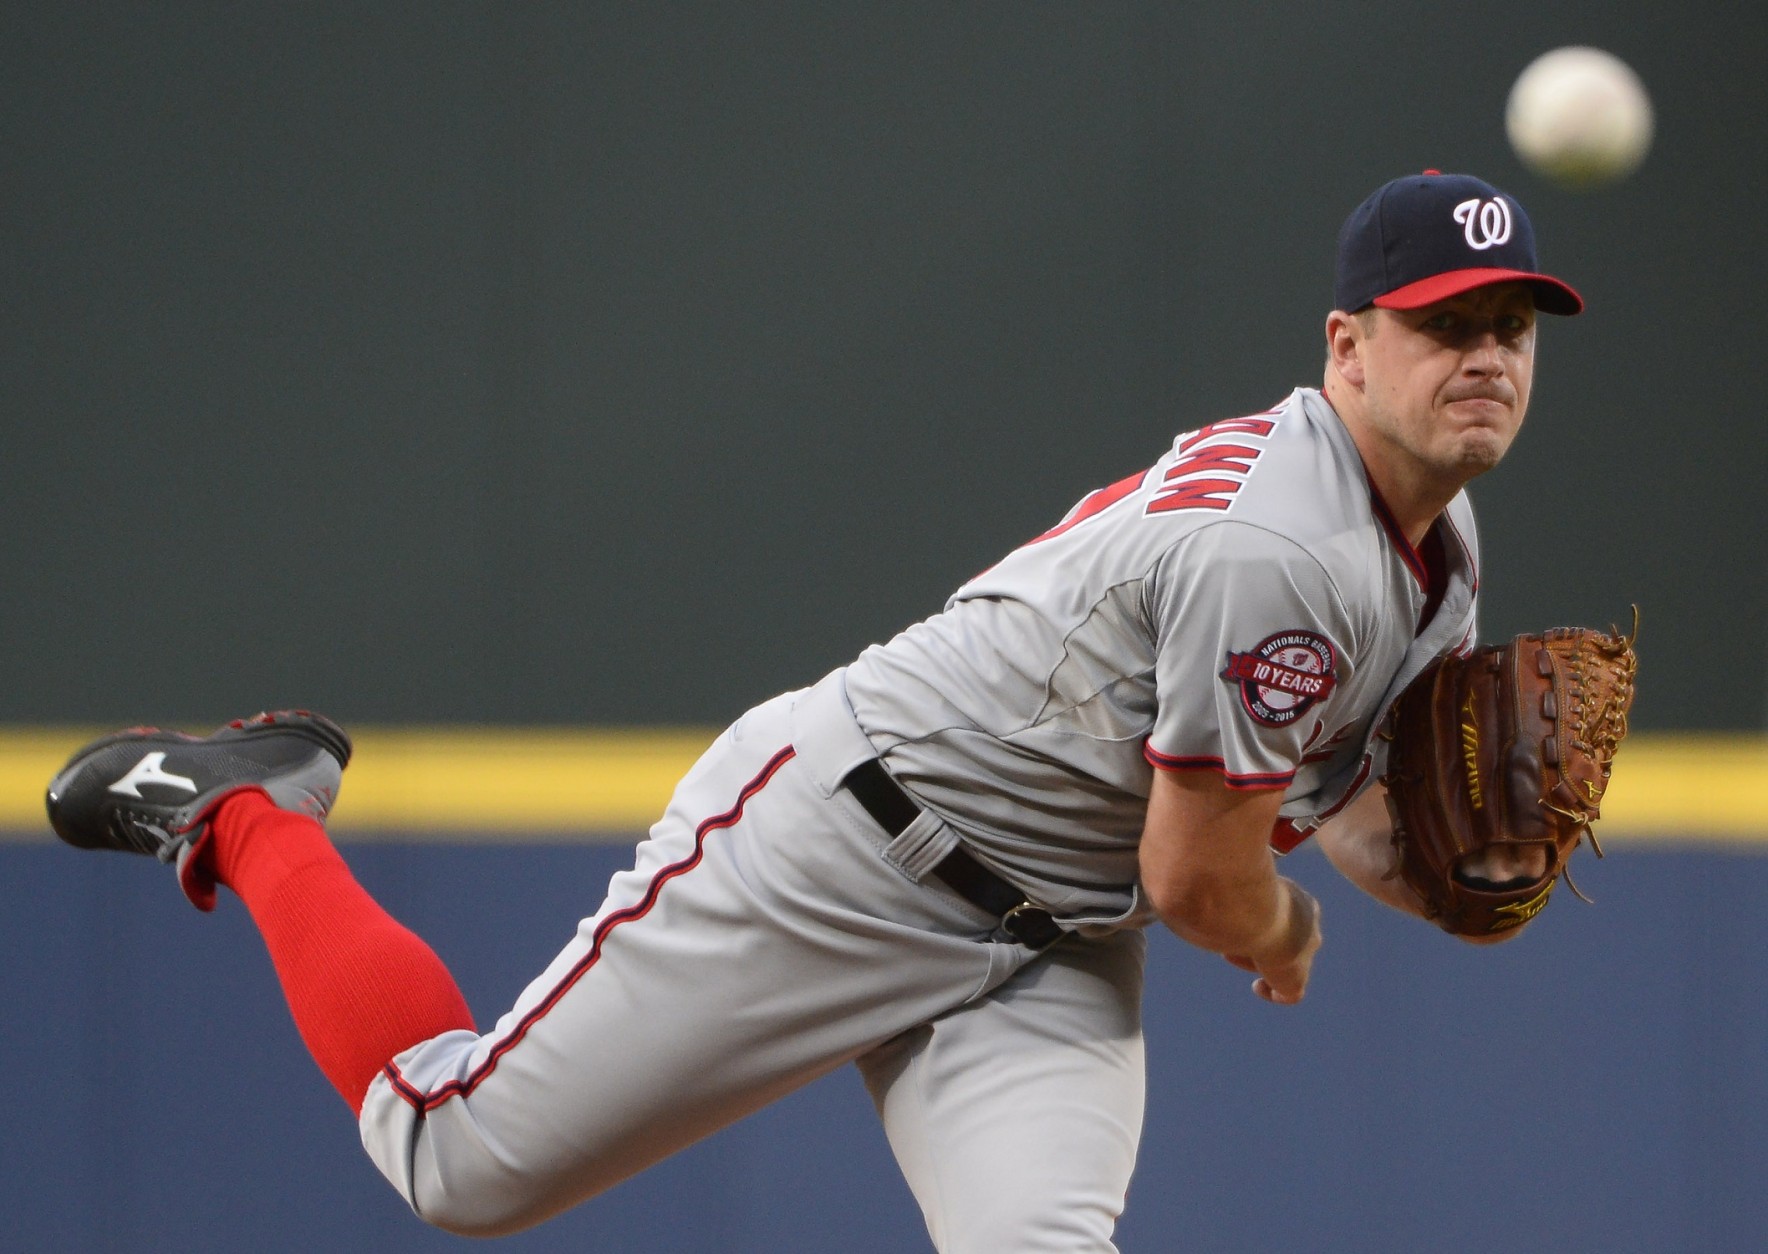 Washington Nationals starting pitcher Jordan Zimmermann delivers to the Atlanta Braves during the first inning of a baseball game Wednesday, April 29, 2015, in Atlanta. (AP Photo/David Tulis)